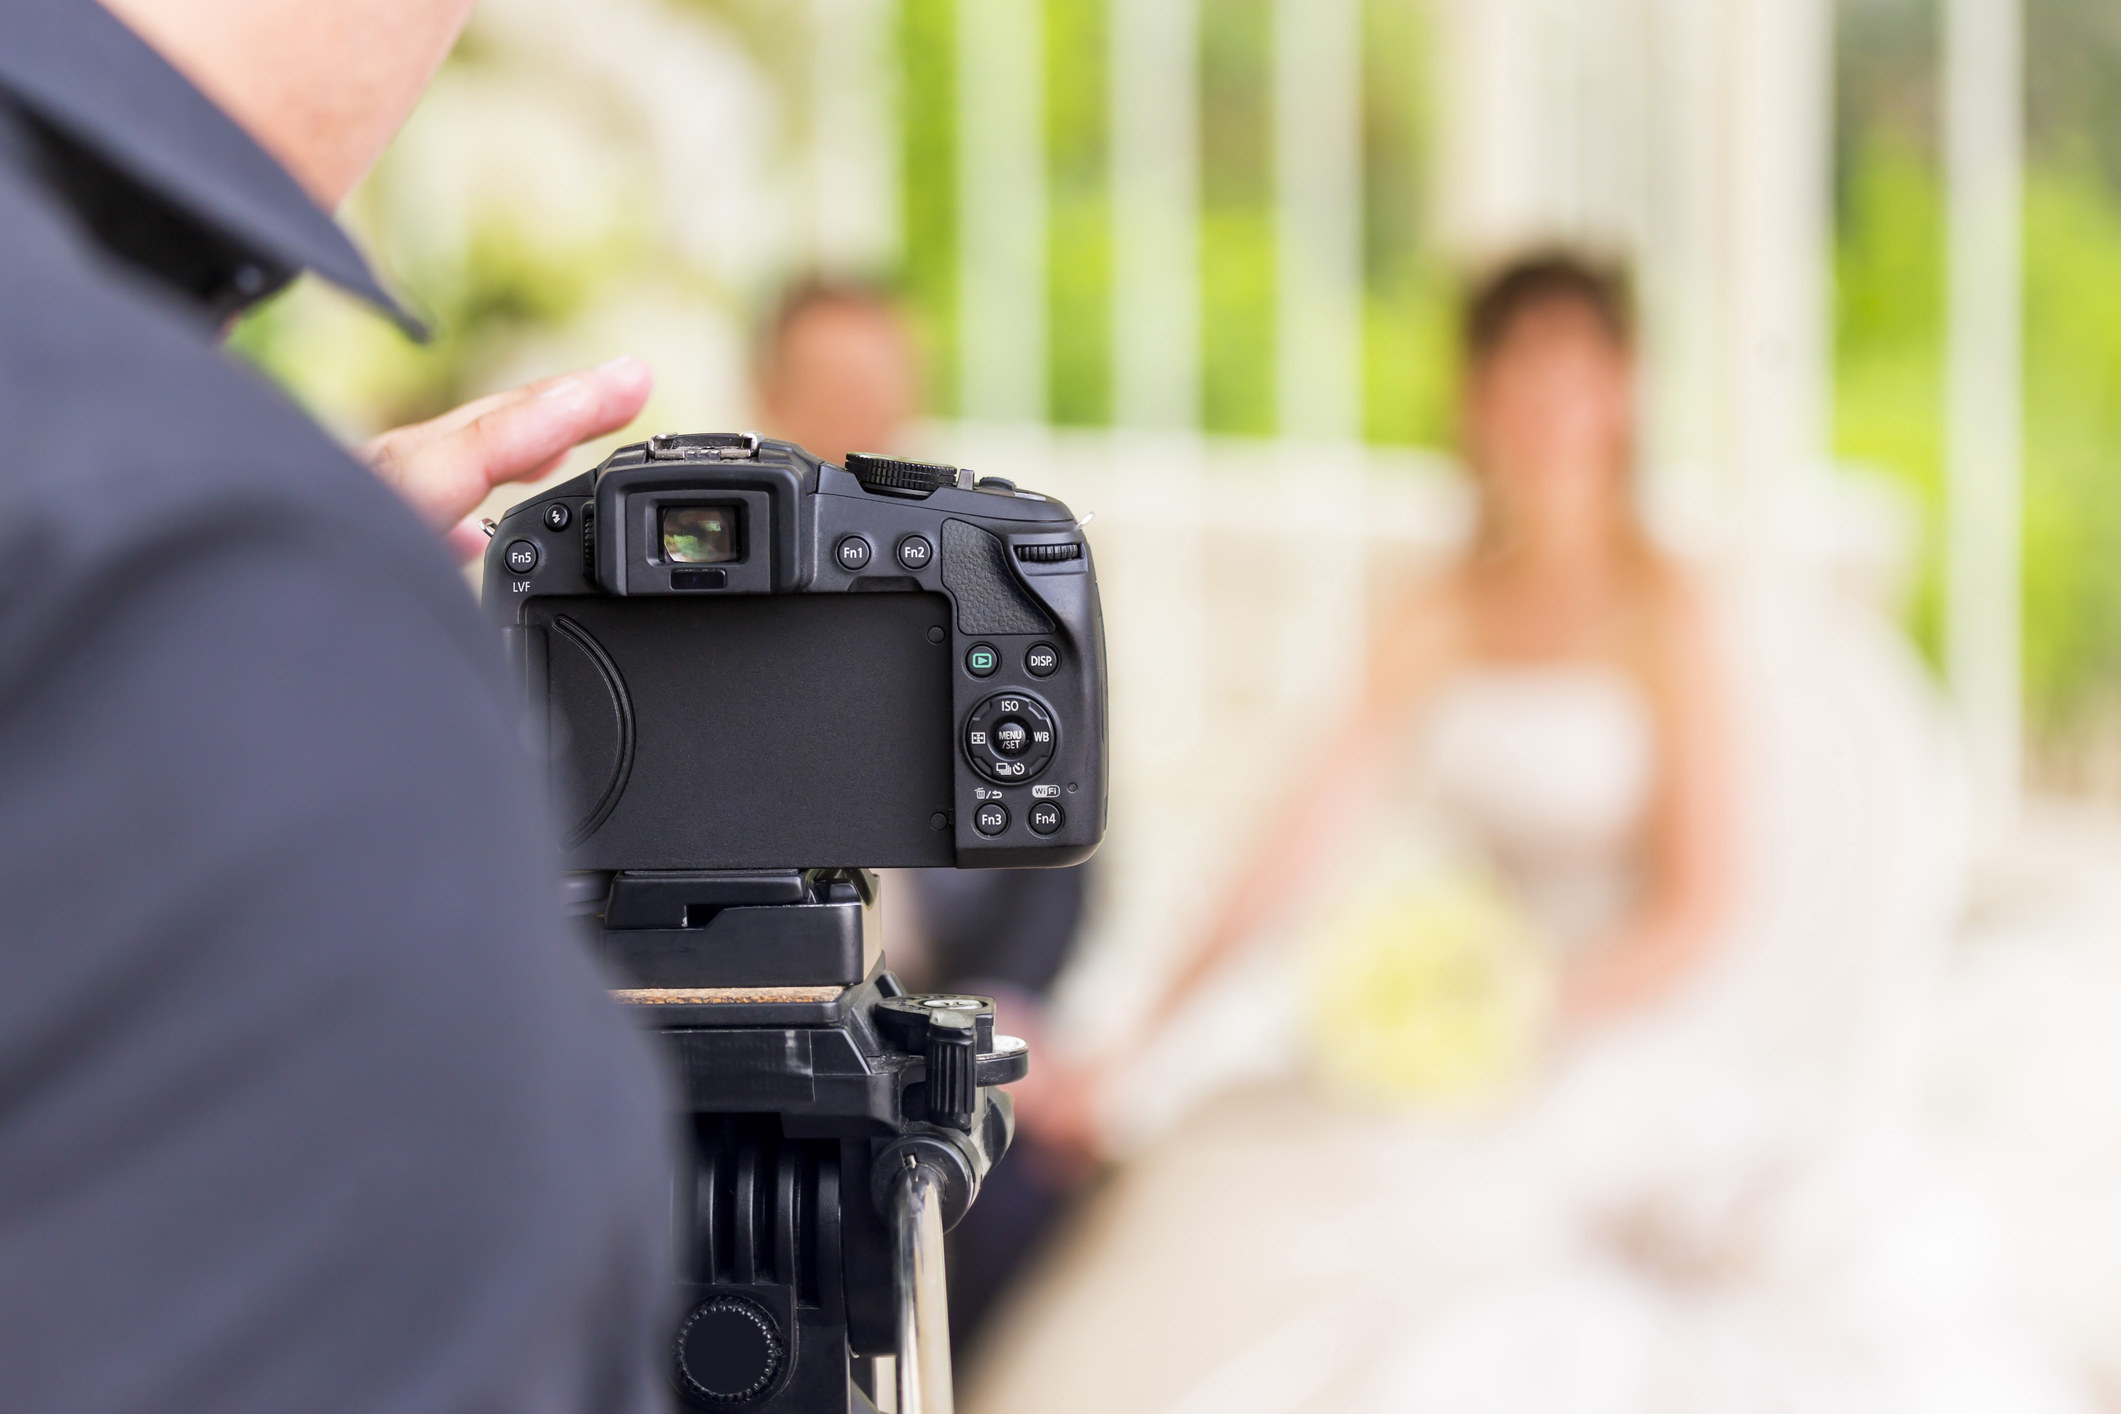 Close-up of the back of a camera, with a fuzzy image of a bride and groom in the backgkround